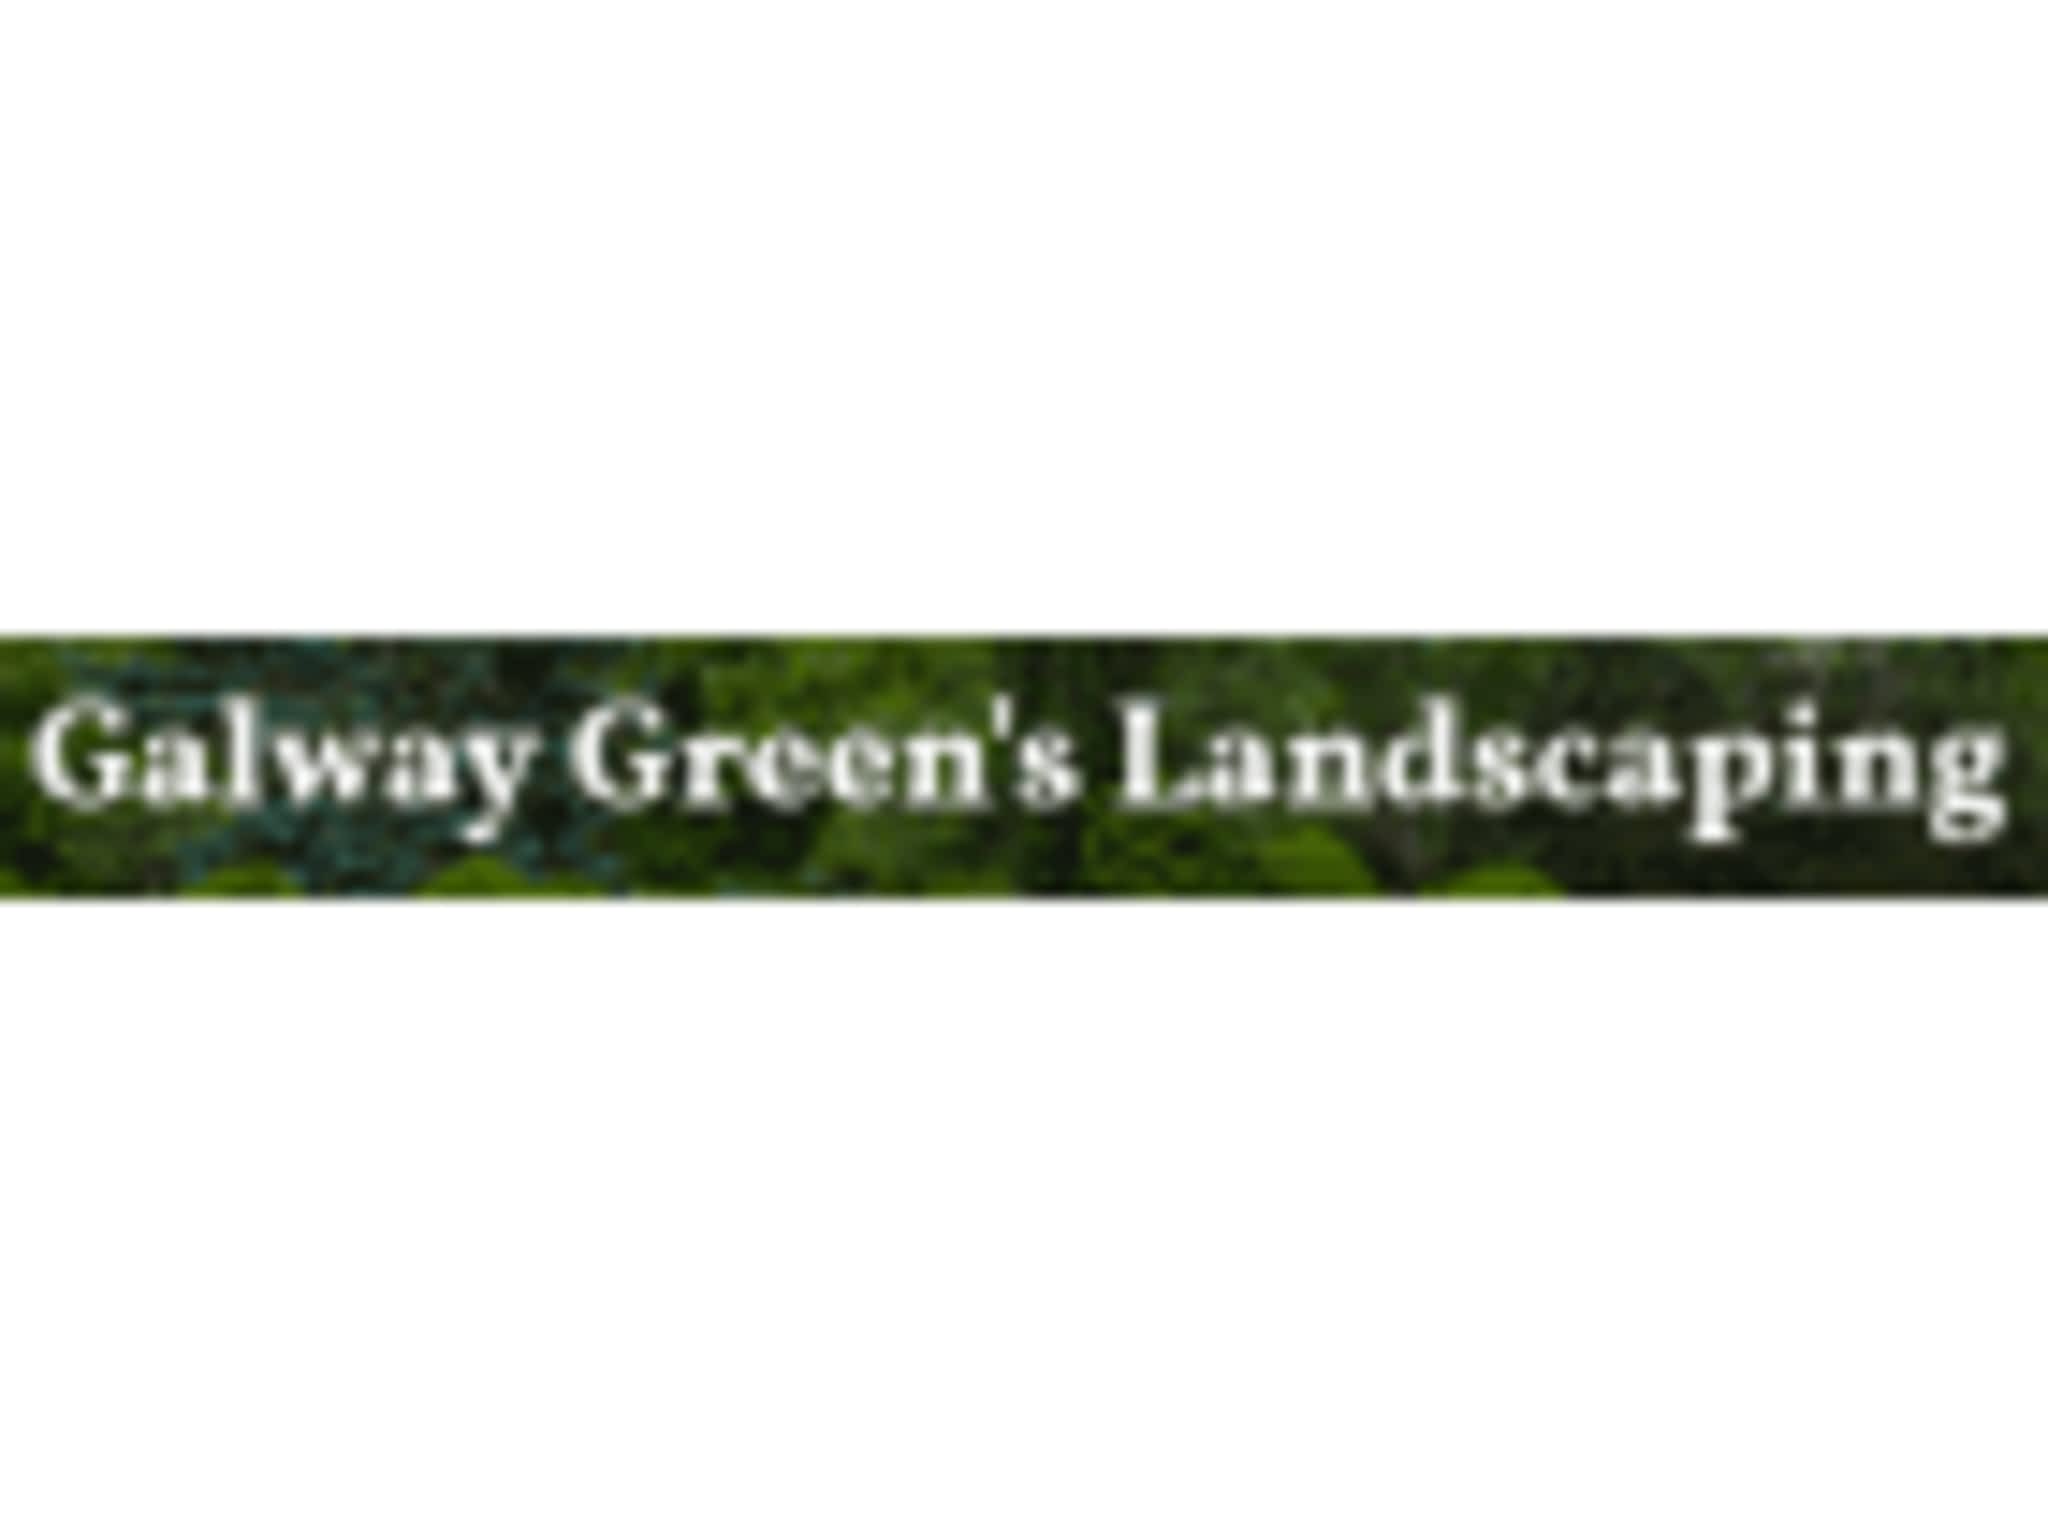 photo Galway Green's Landscaping